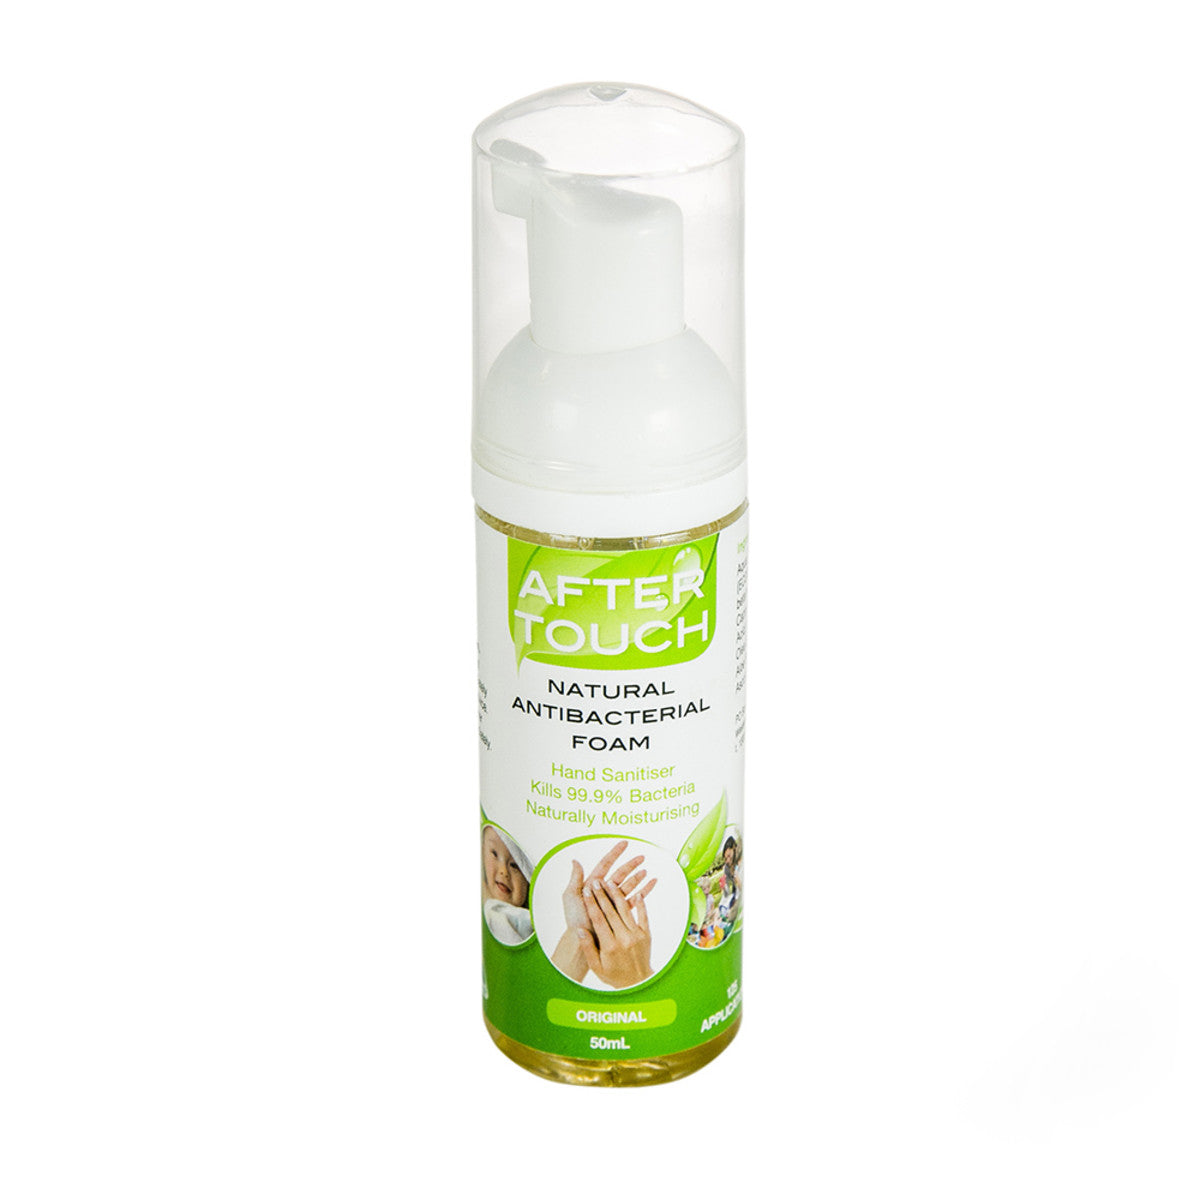 After Touch - Natural Antibacterial Hand Sanitising Foam